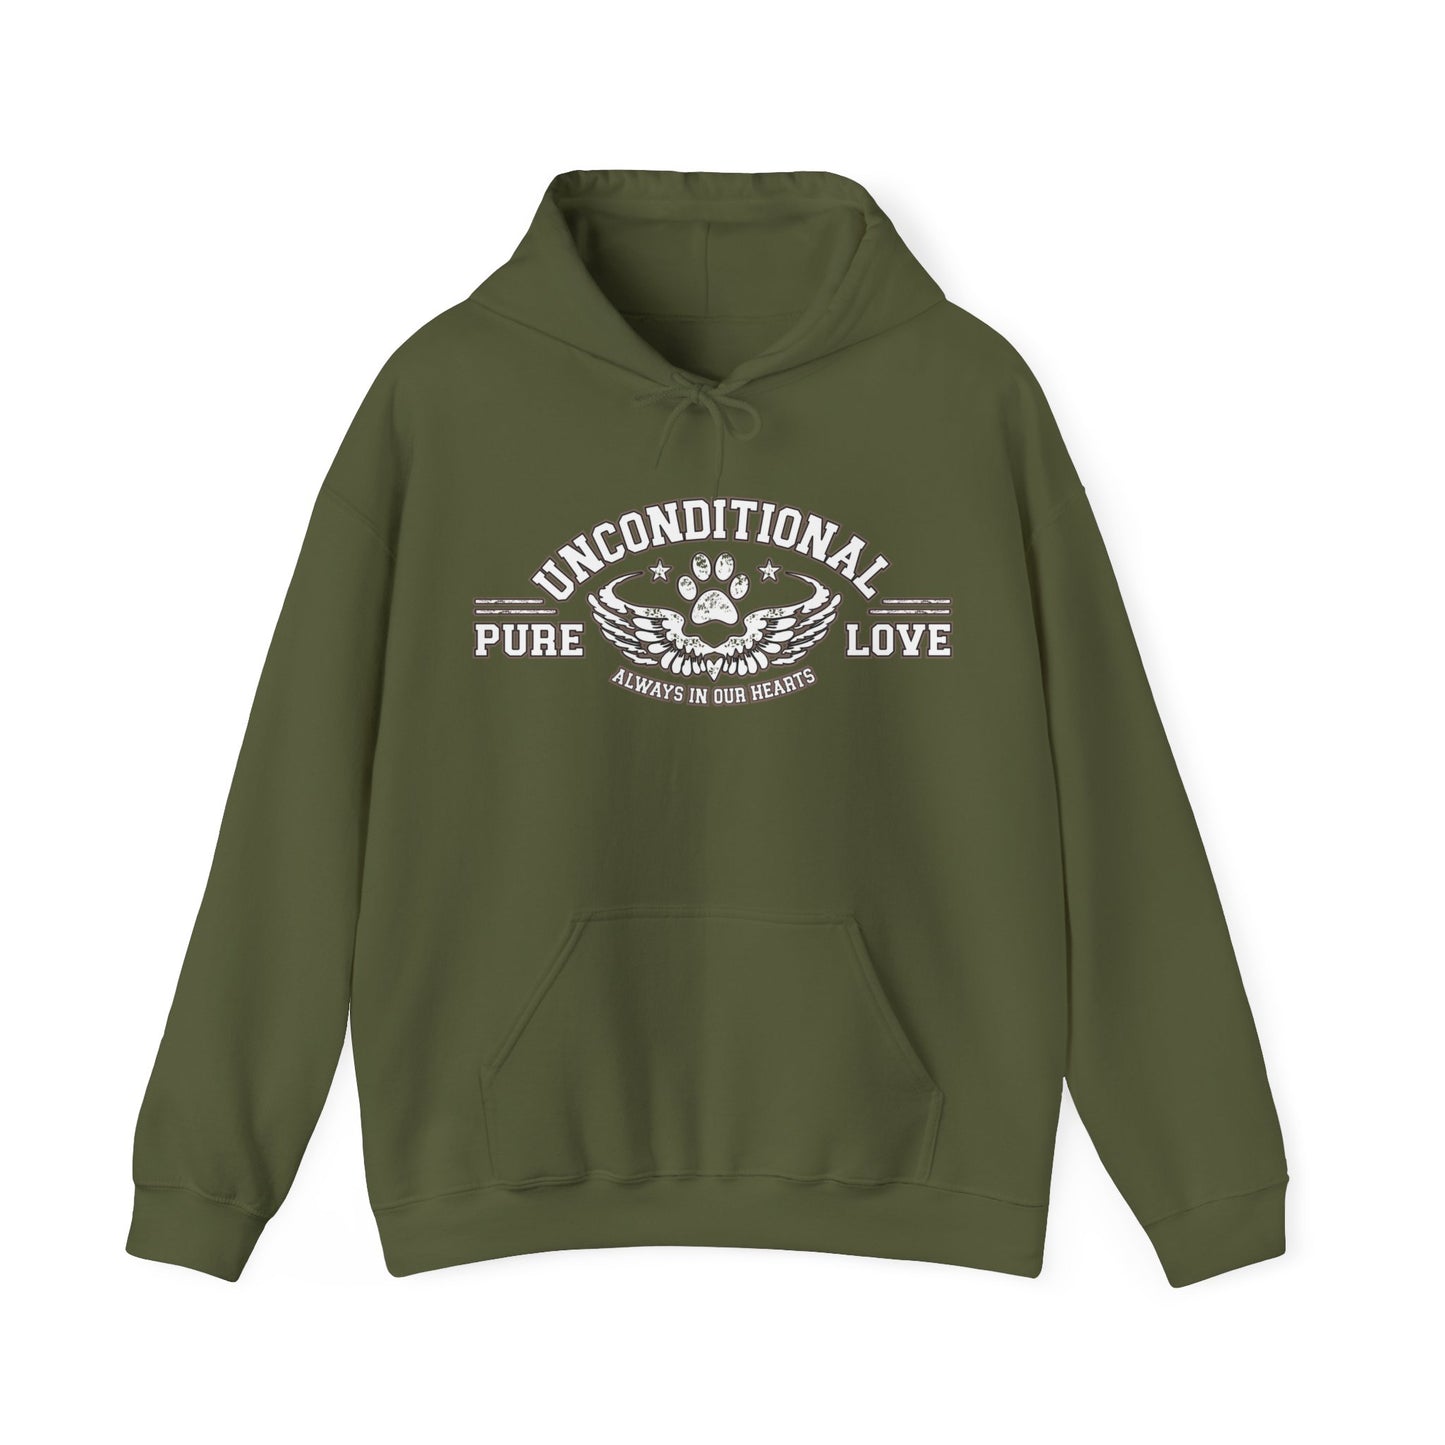  In a military green color, the Dogs Pure Love unisex hoodie proudly displays the uplifting slogan 'Unconditional Pure Love, always in our hearts.' Set against a clean backdrop white.